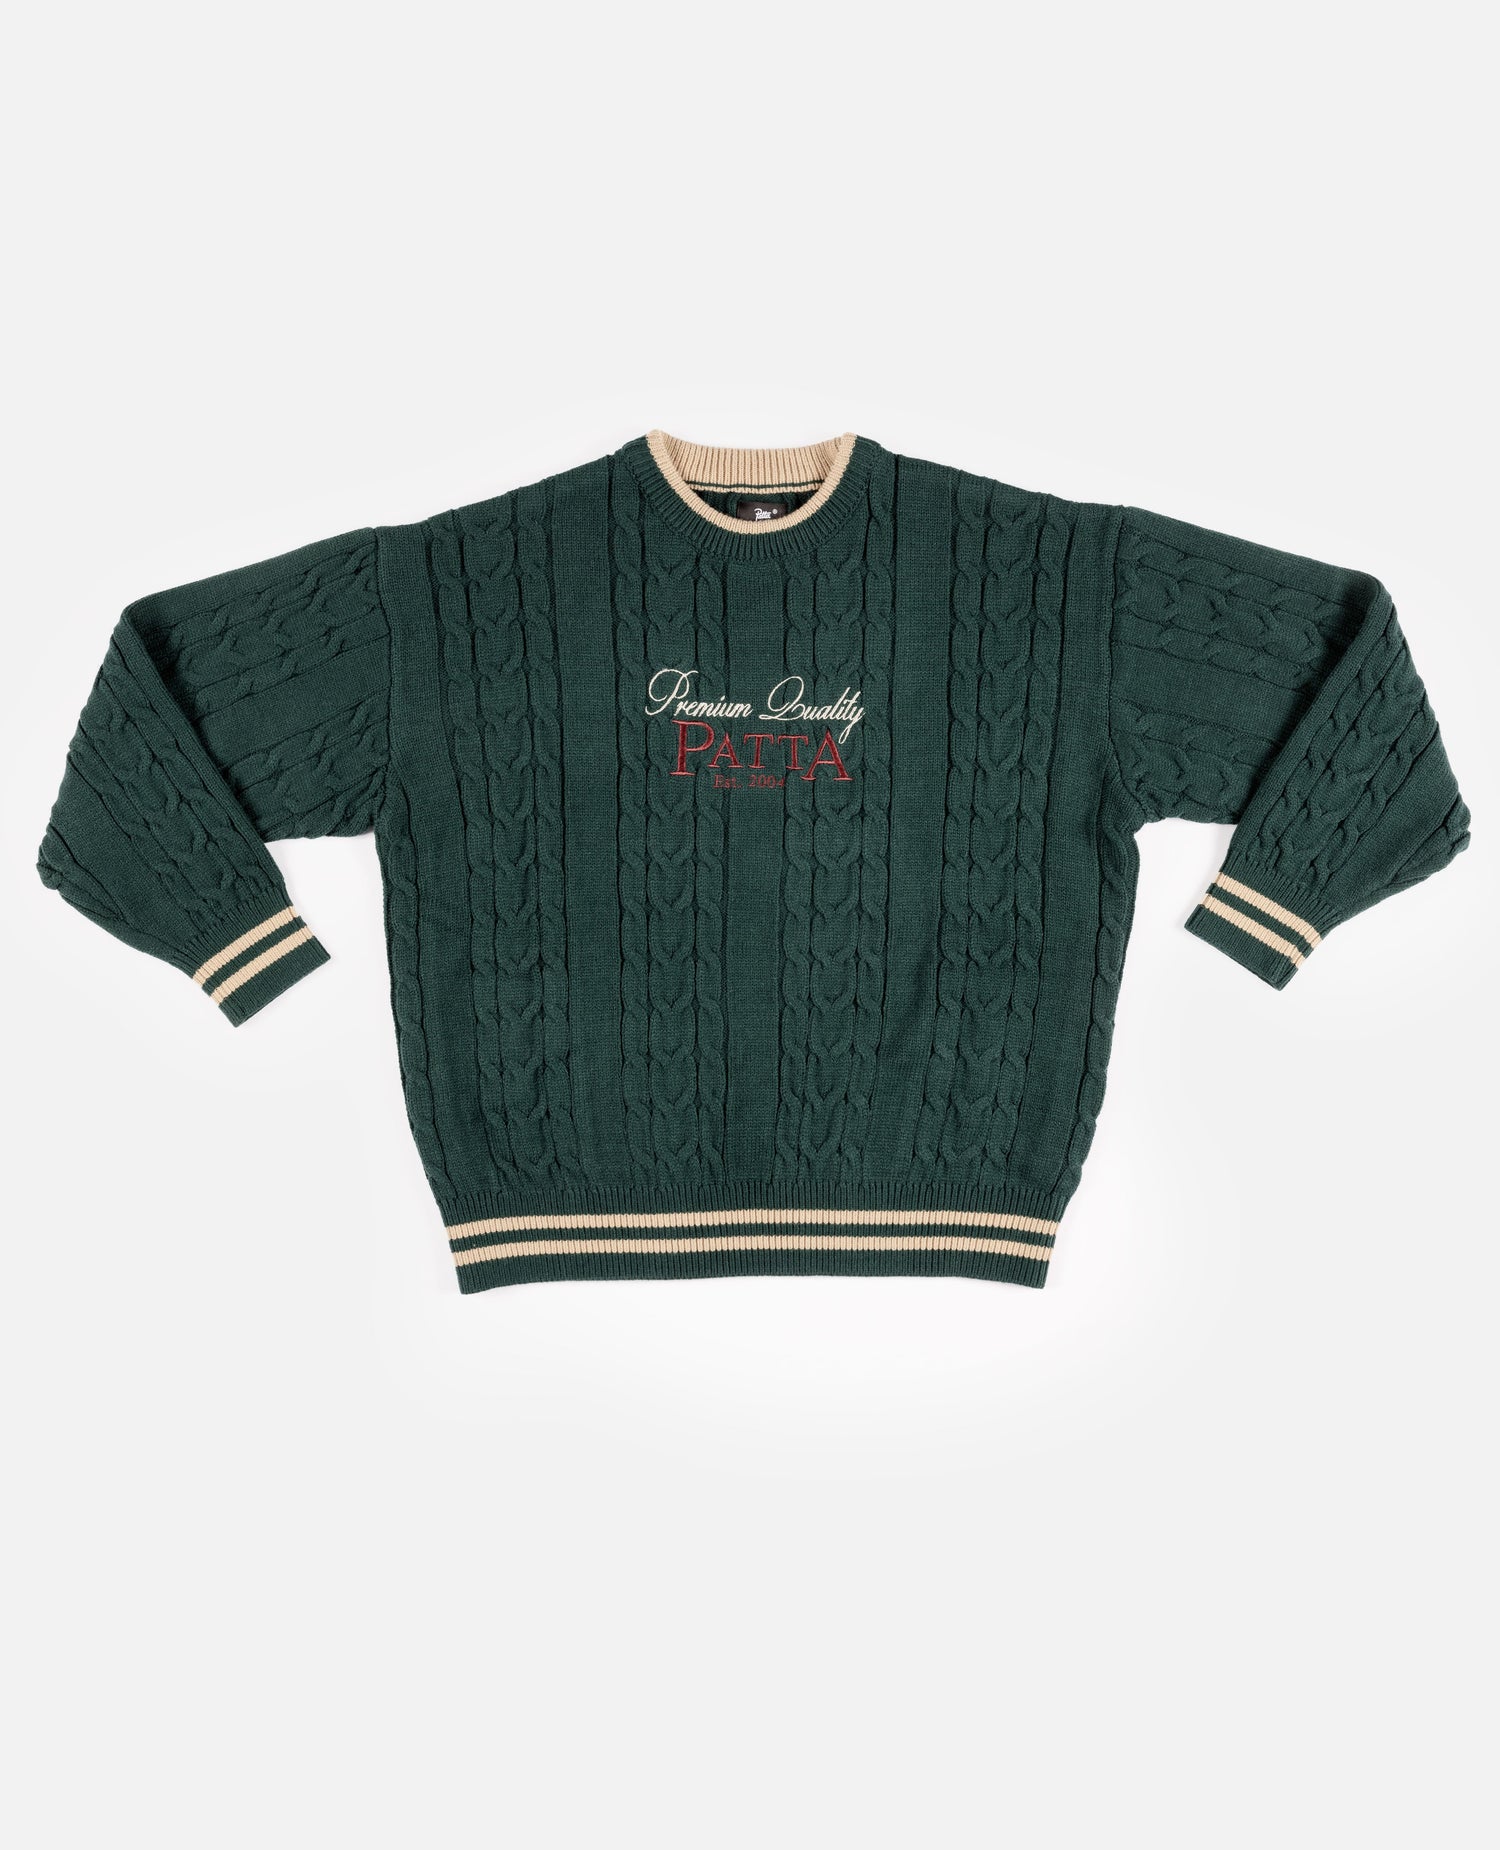 Patta Premium Cable Knitted Sweater (Botanical Garden)